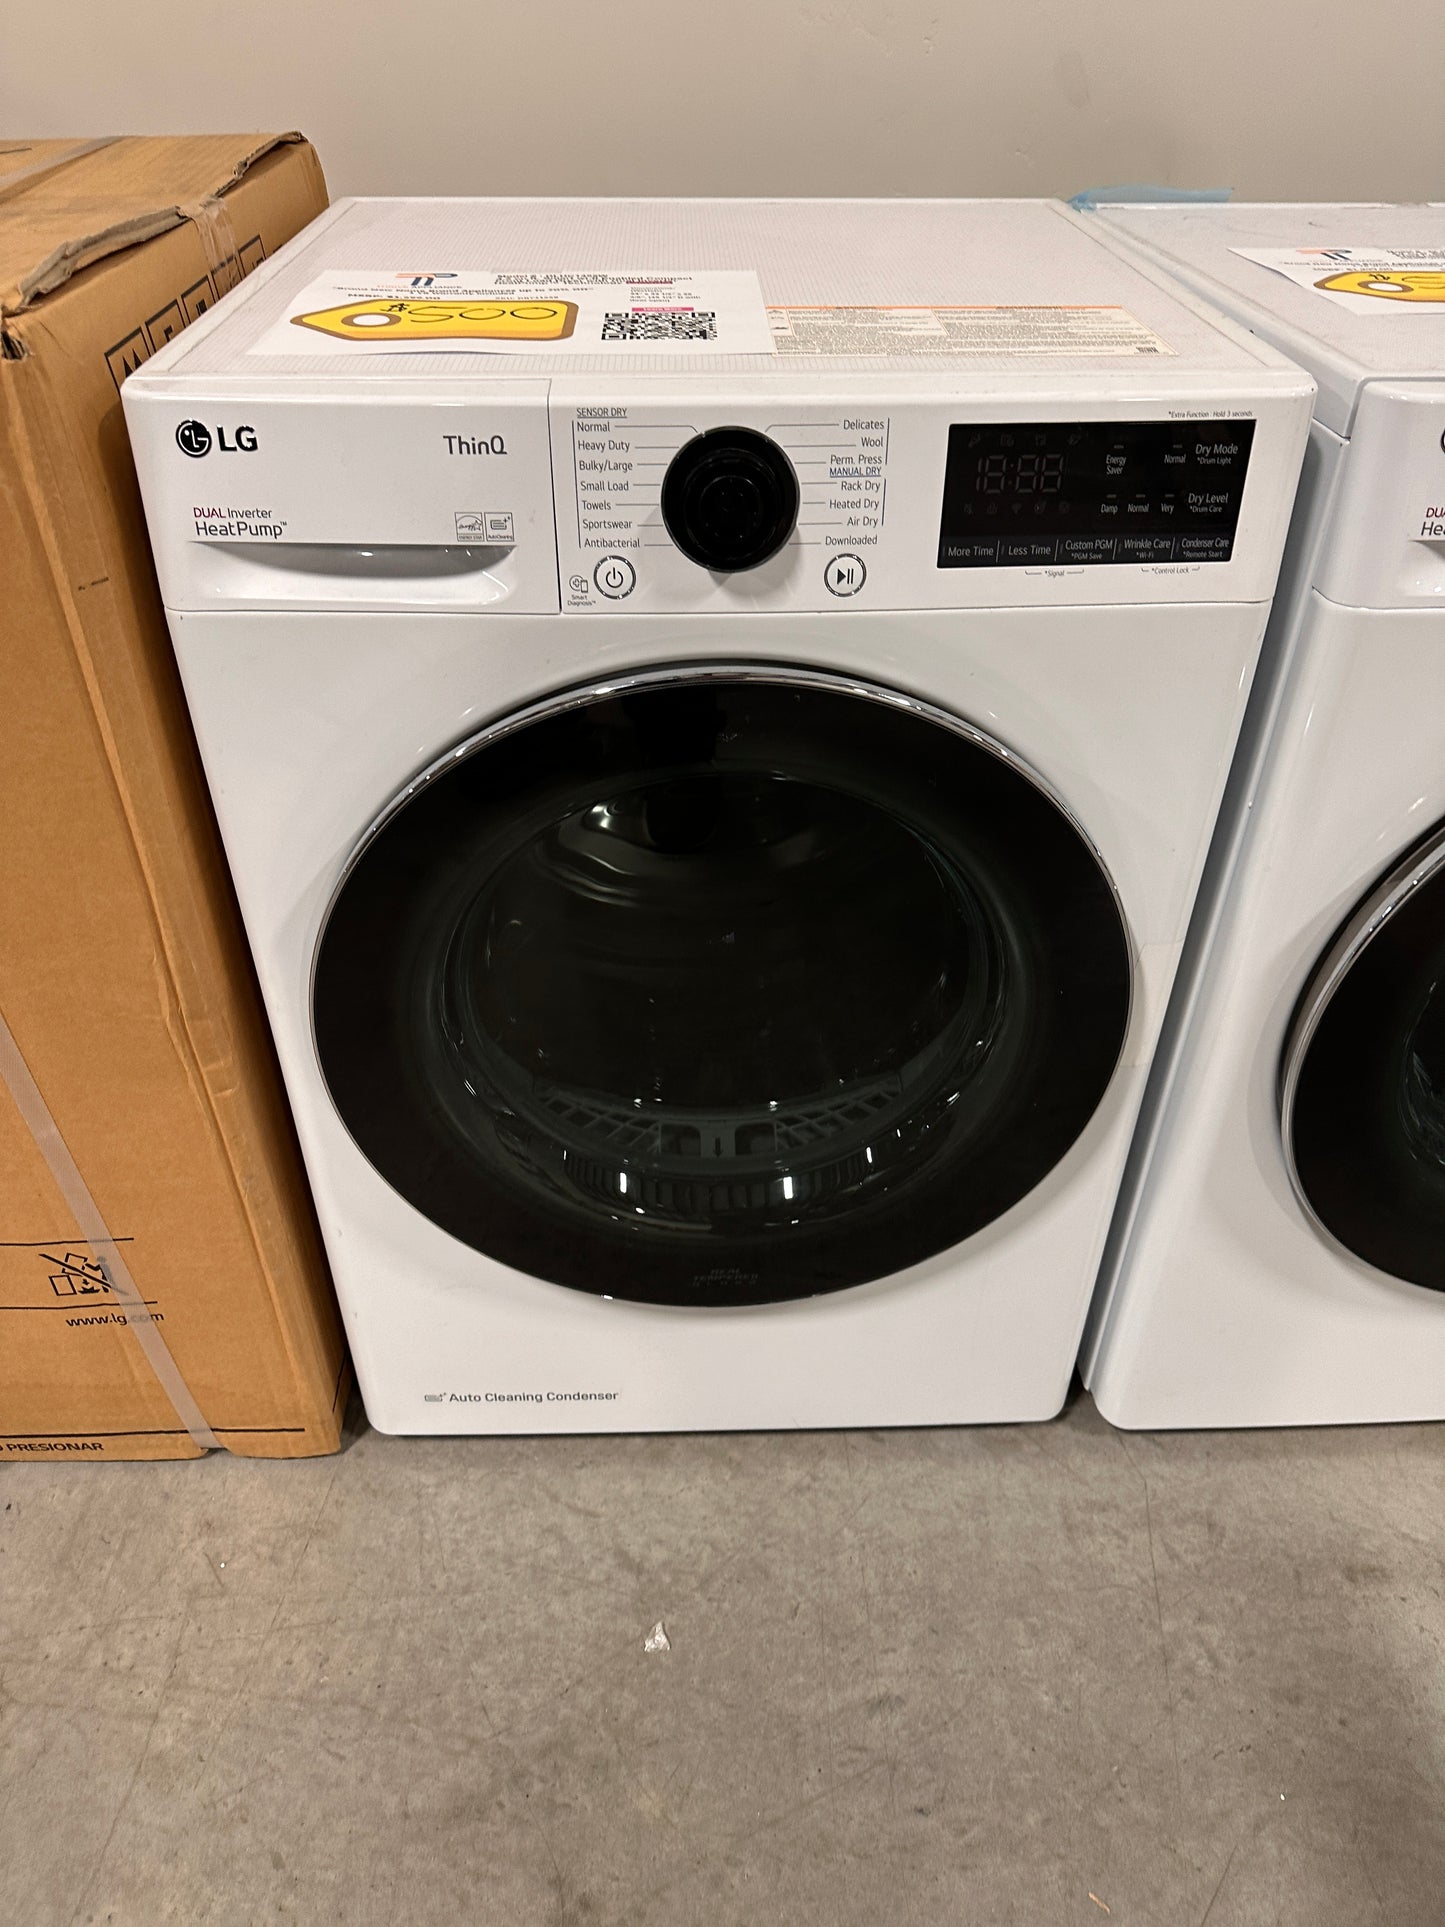 NEW LG 4.2-cu ft Stackable Electric Dryer (White) ENERGY STAR Model #DLHC1455W DRY11658